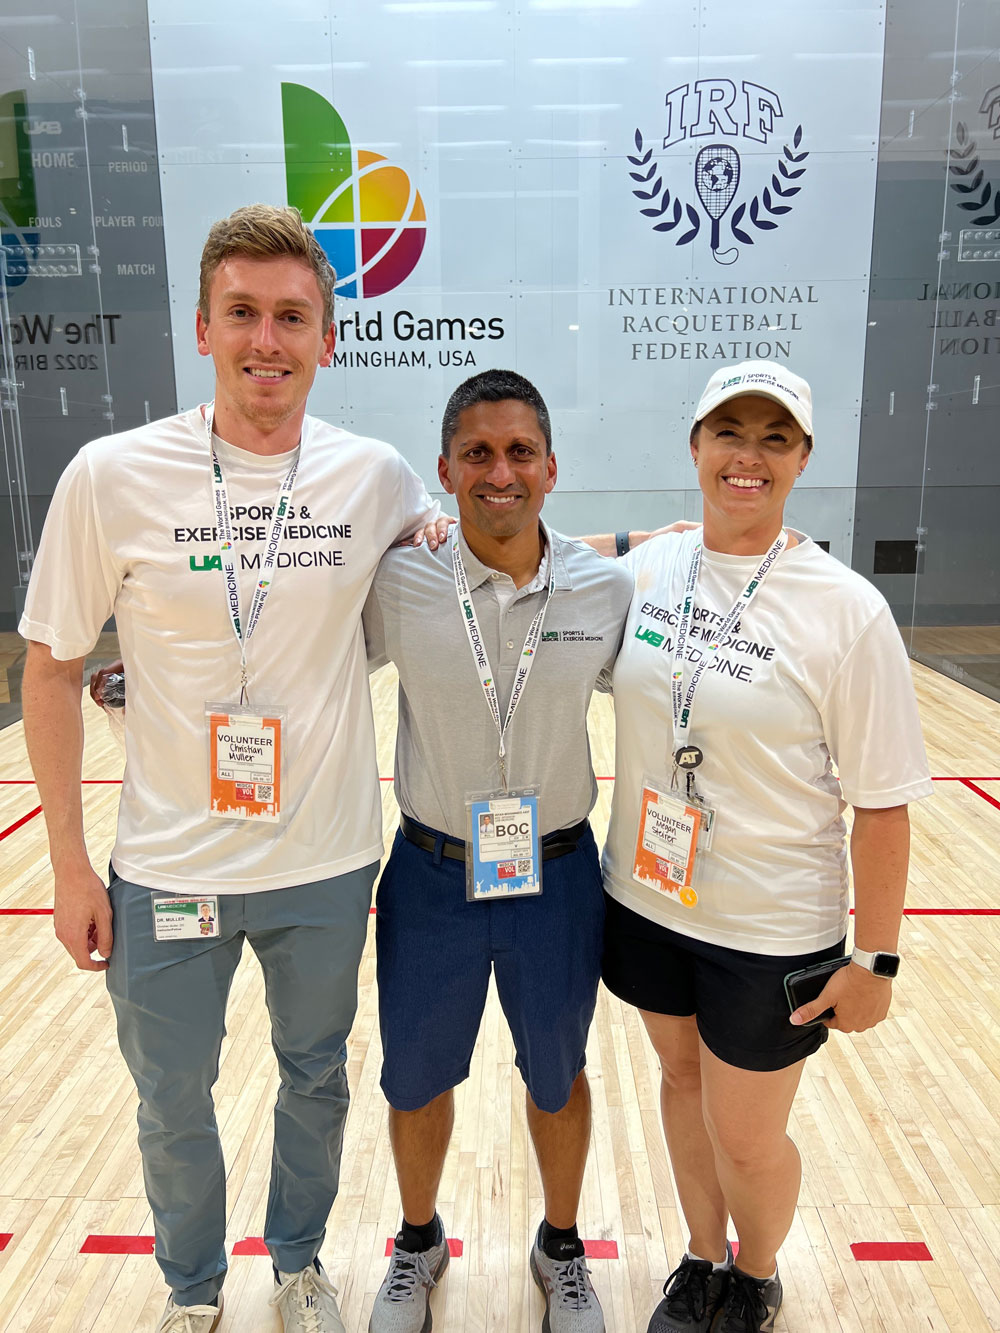 Christian Muller, D.O., Irfan Asif, M.D., and Megan Steirer, MA, LAT, ATC, at the racquetball competition.